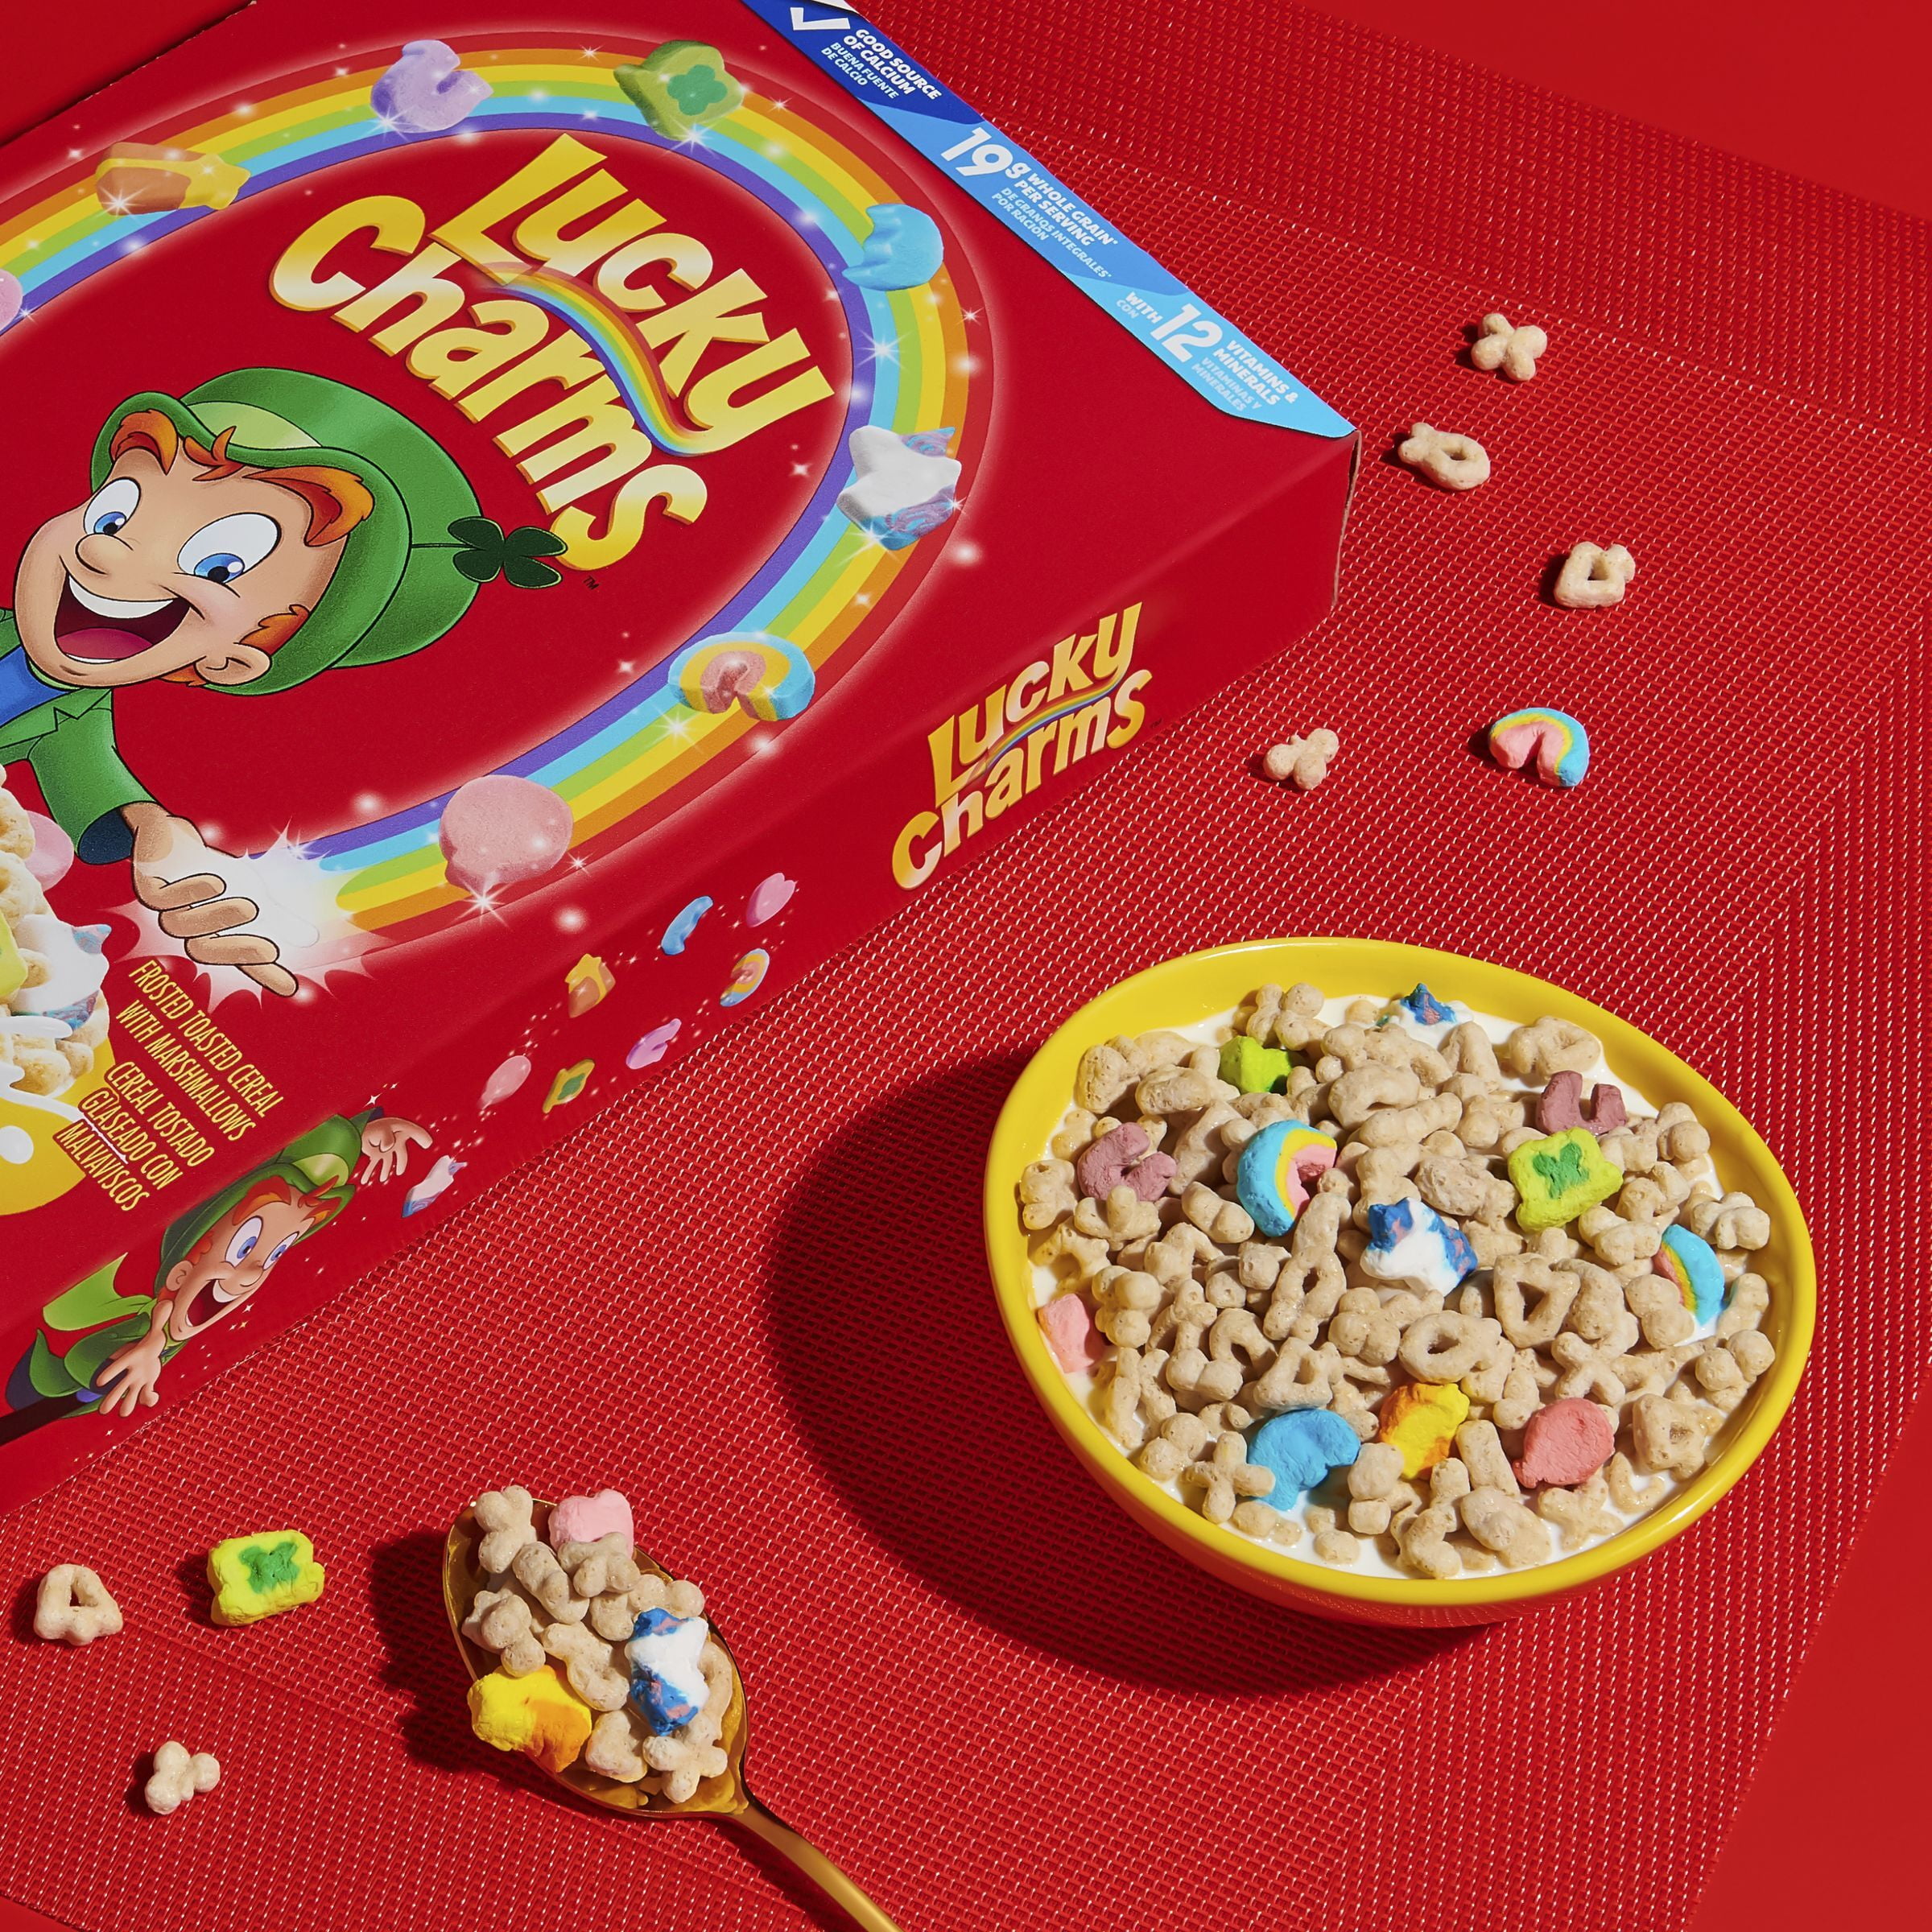 Lucky Charms Smores Breakfast Cereal with Marshmallows, Family Size, 18 OZ